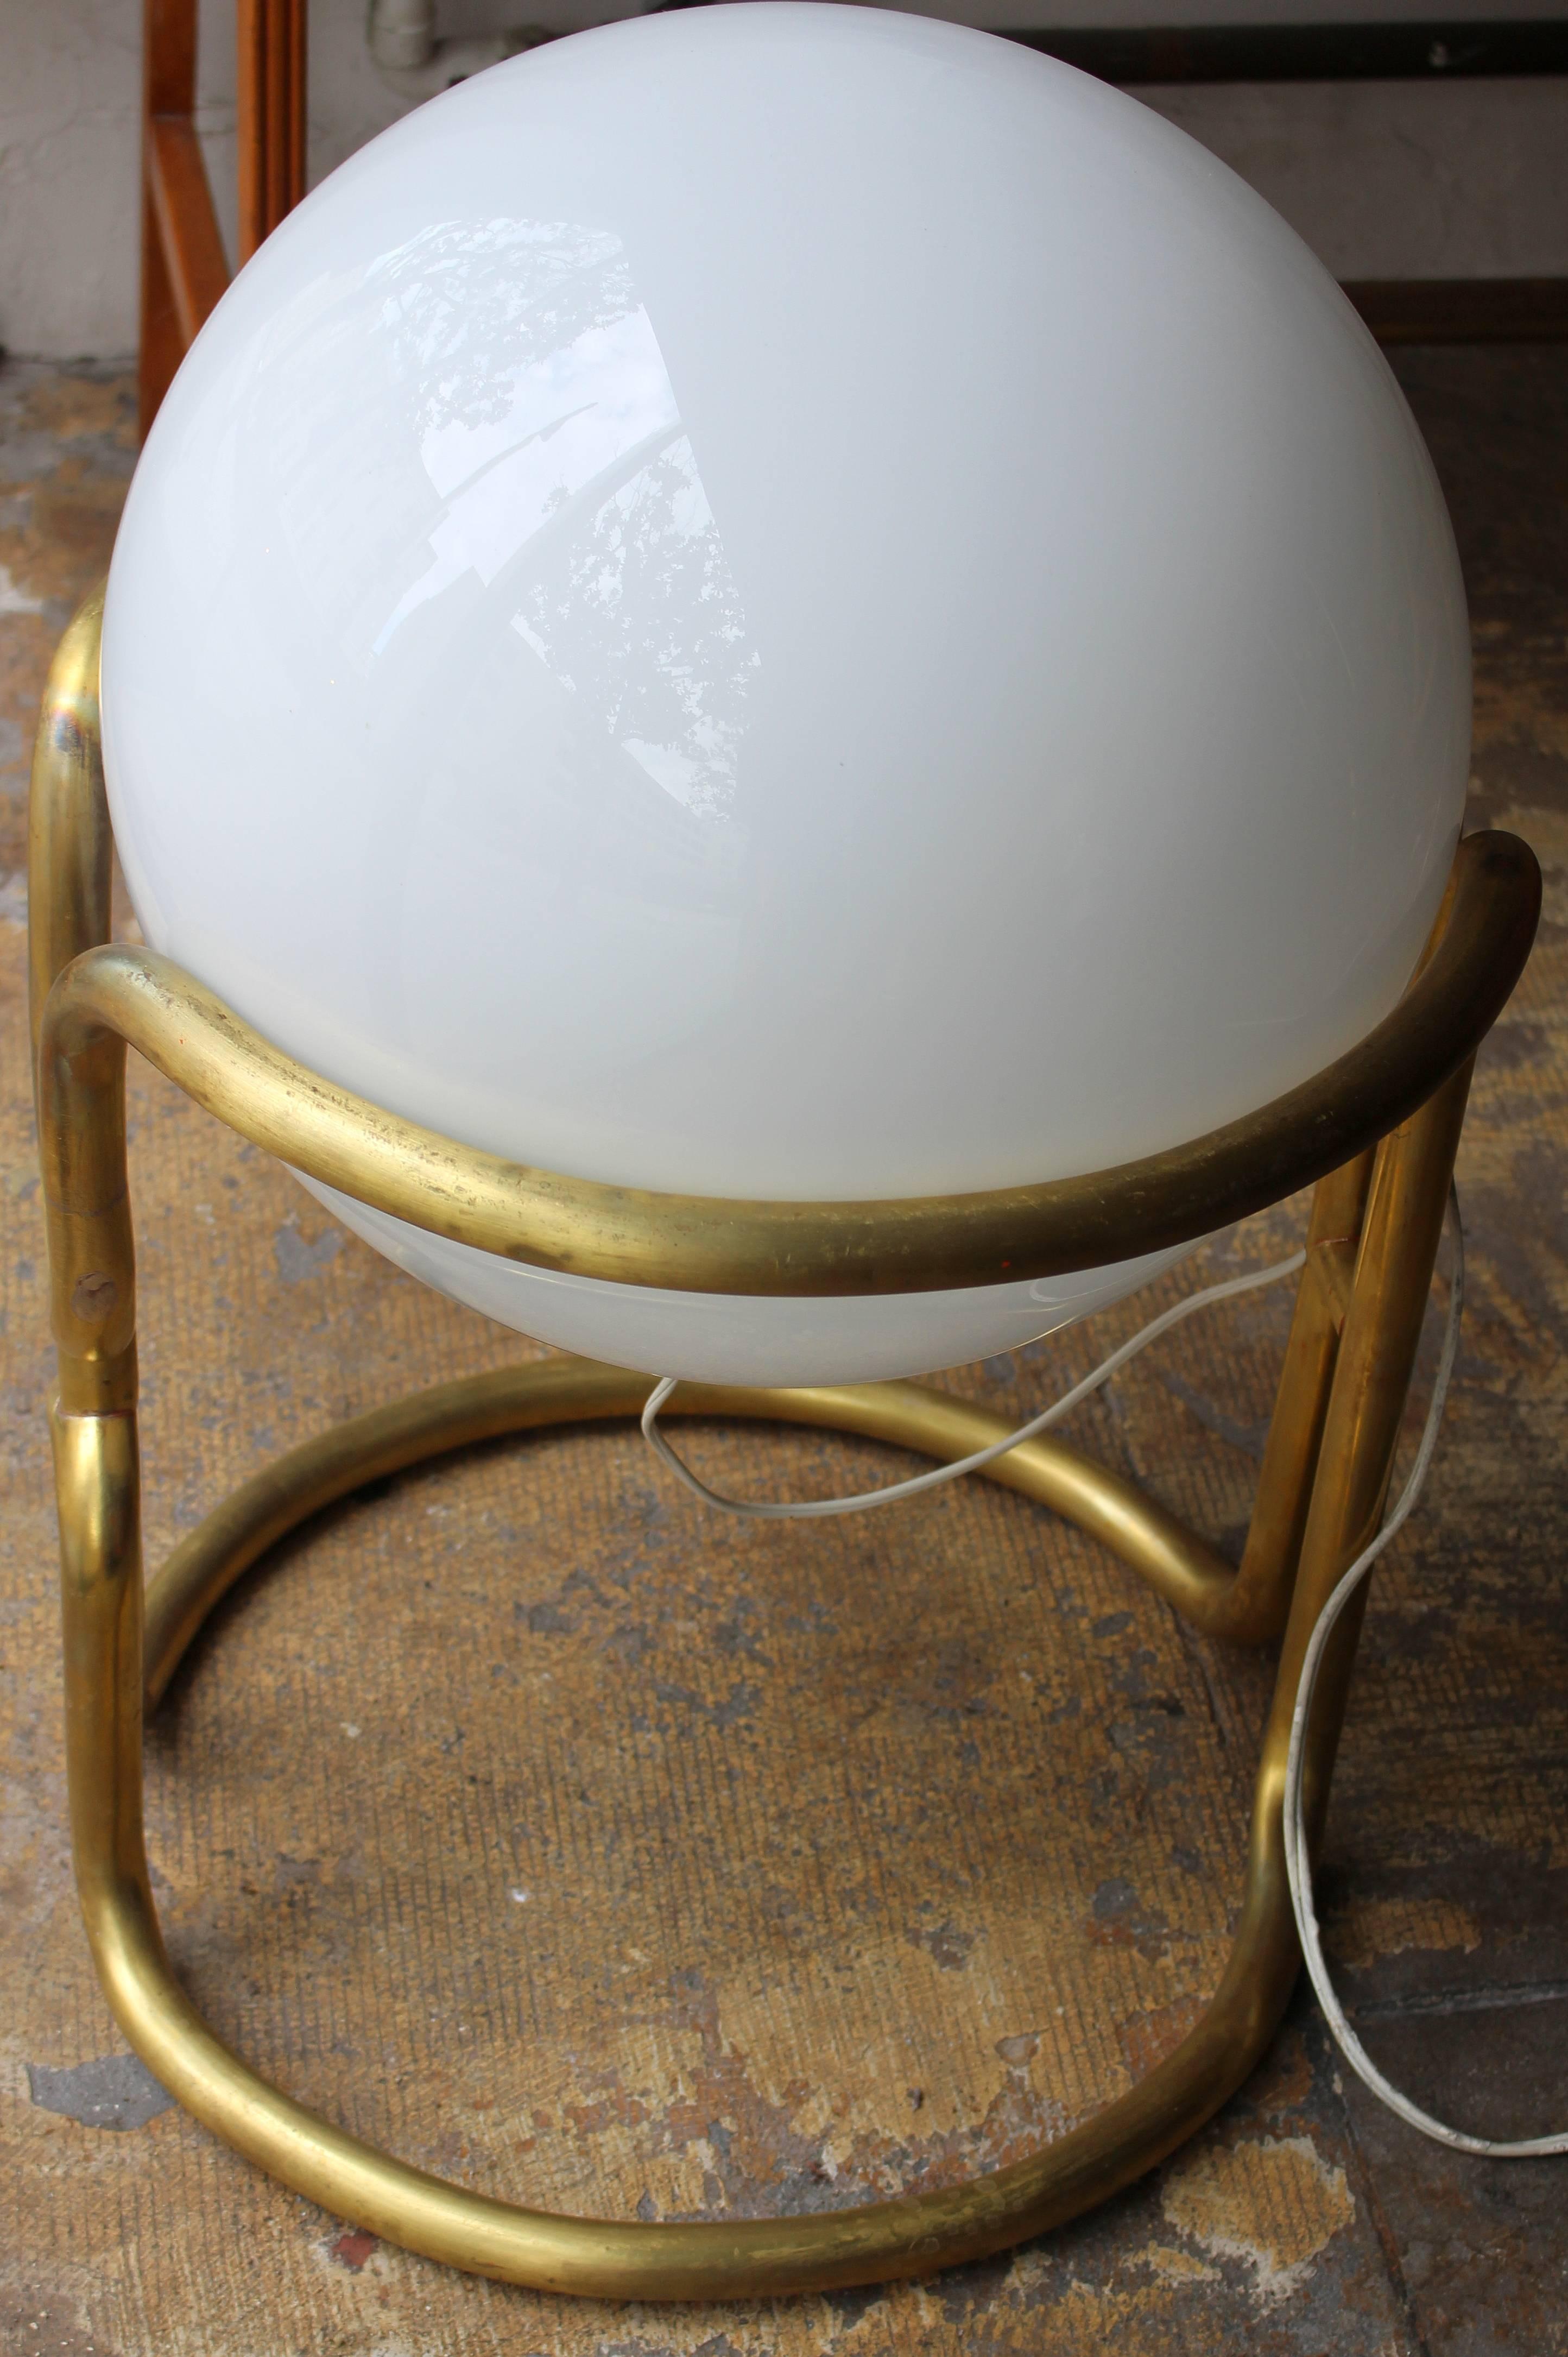 Italian brass floor lamp inspired by Stilnovo design. Brass base and white opaline glass. It could be a very large table lamp.

Item is at the Beverly location
7274 Beverly Blvd 
Los Angeles, CA 90036.
  